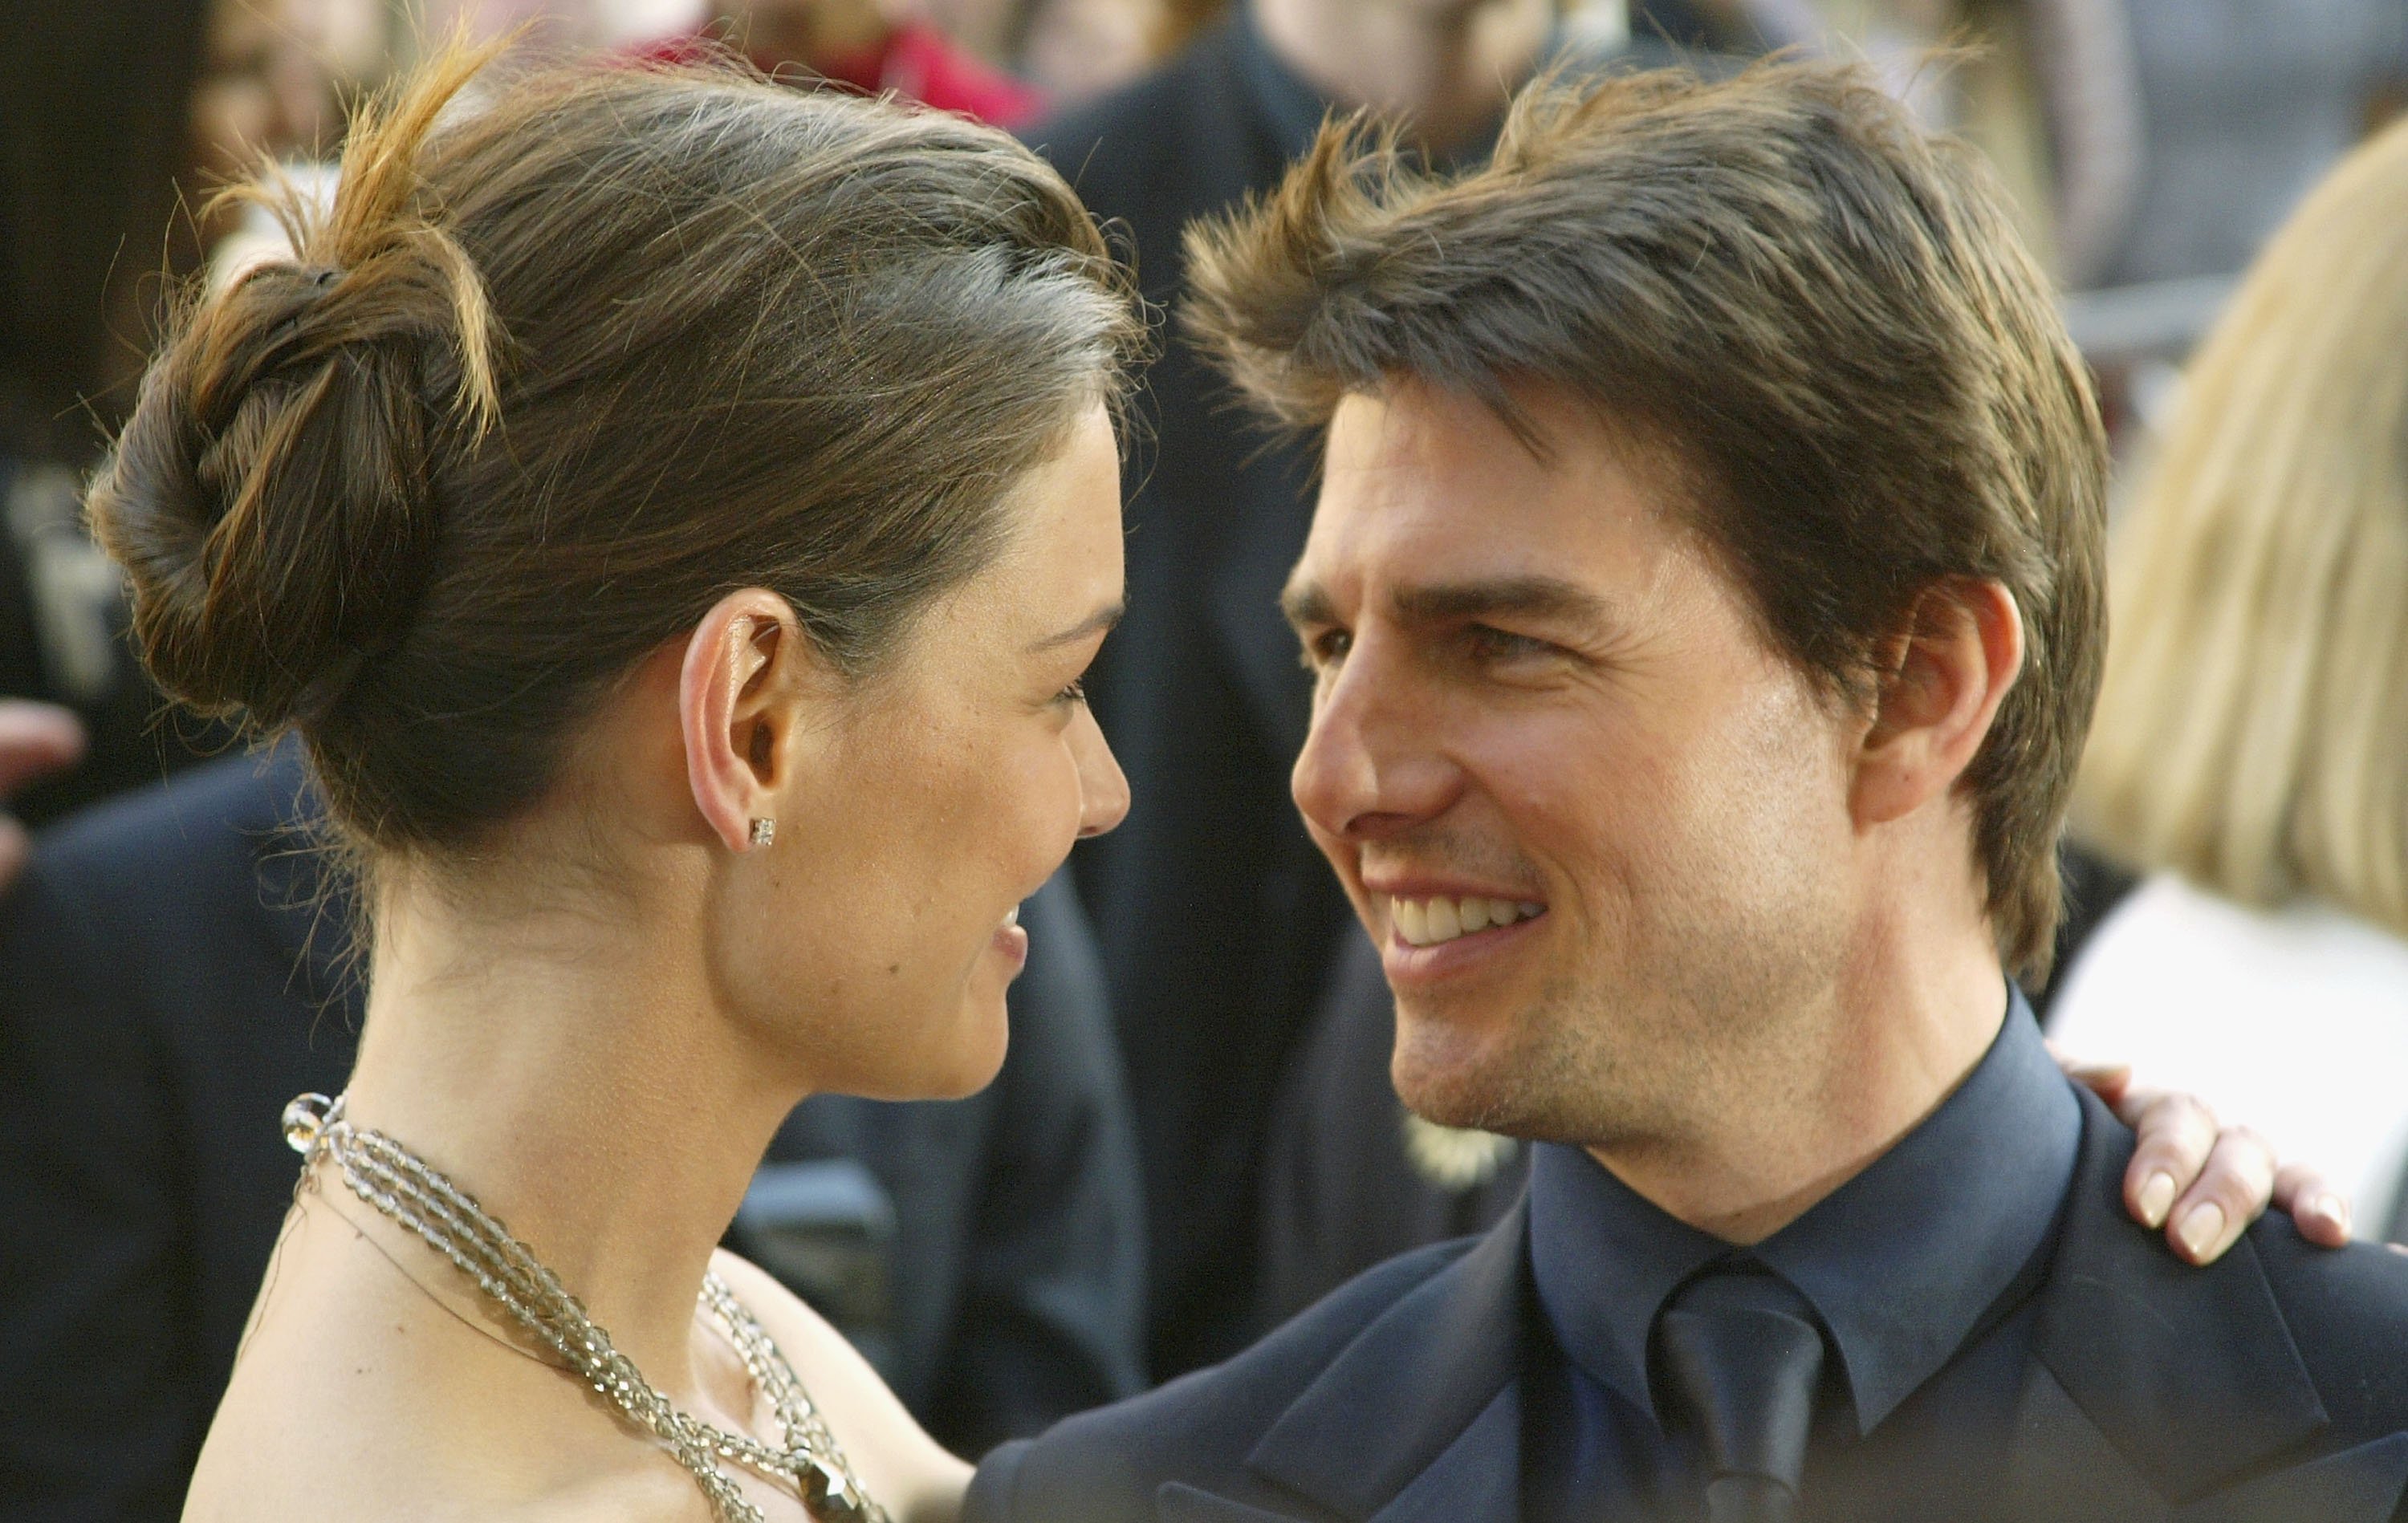 Tom Cruise and Katie Holmes at the David di Donatello Italian film awards in 2005 in Rome, Italy. | Source: Getty Images